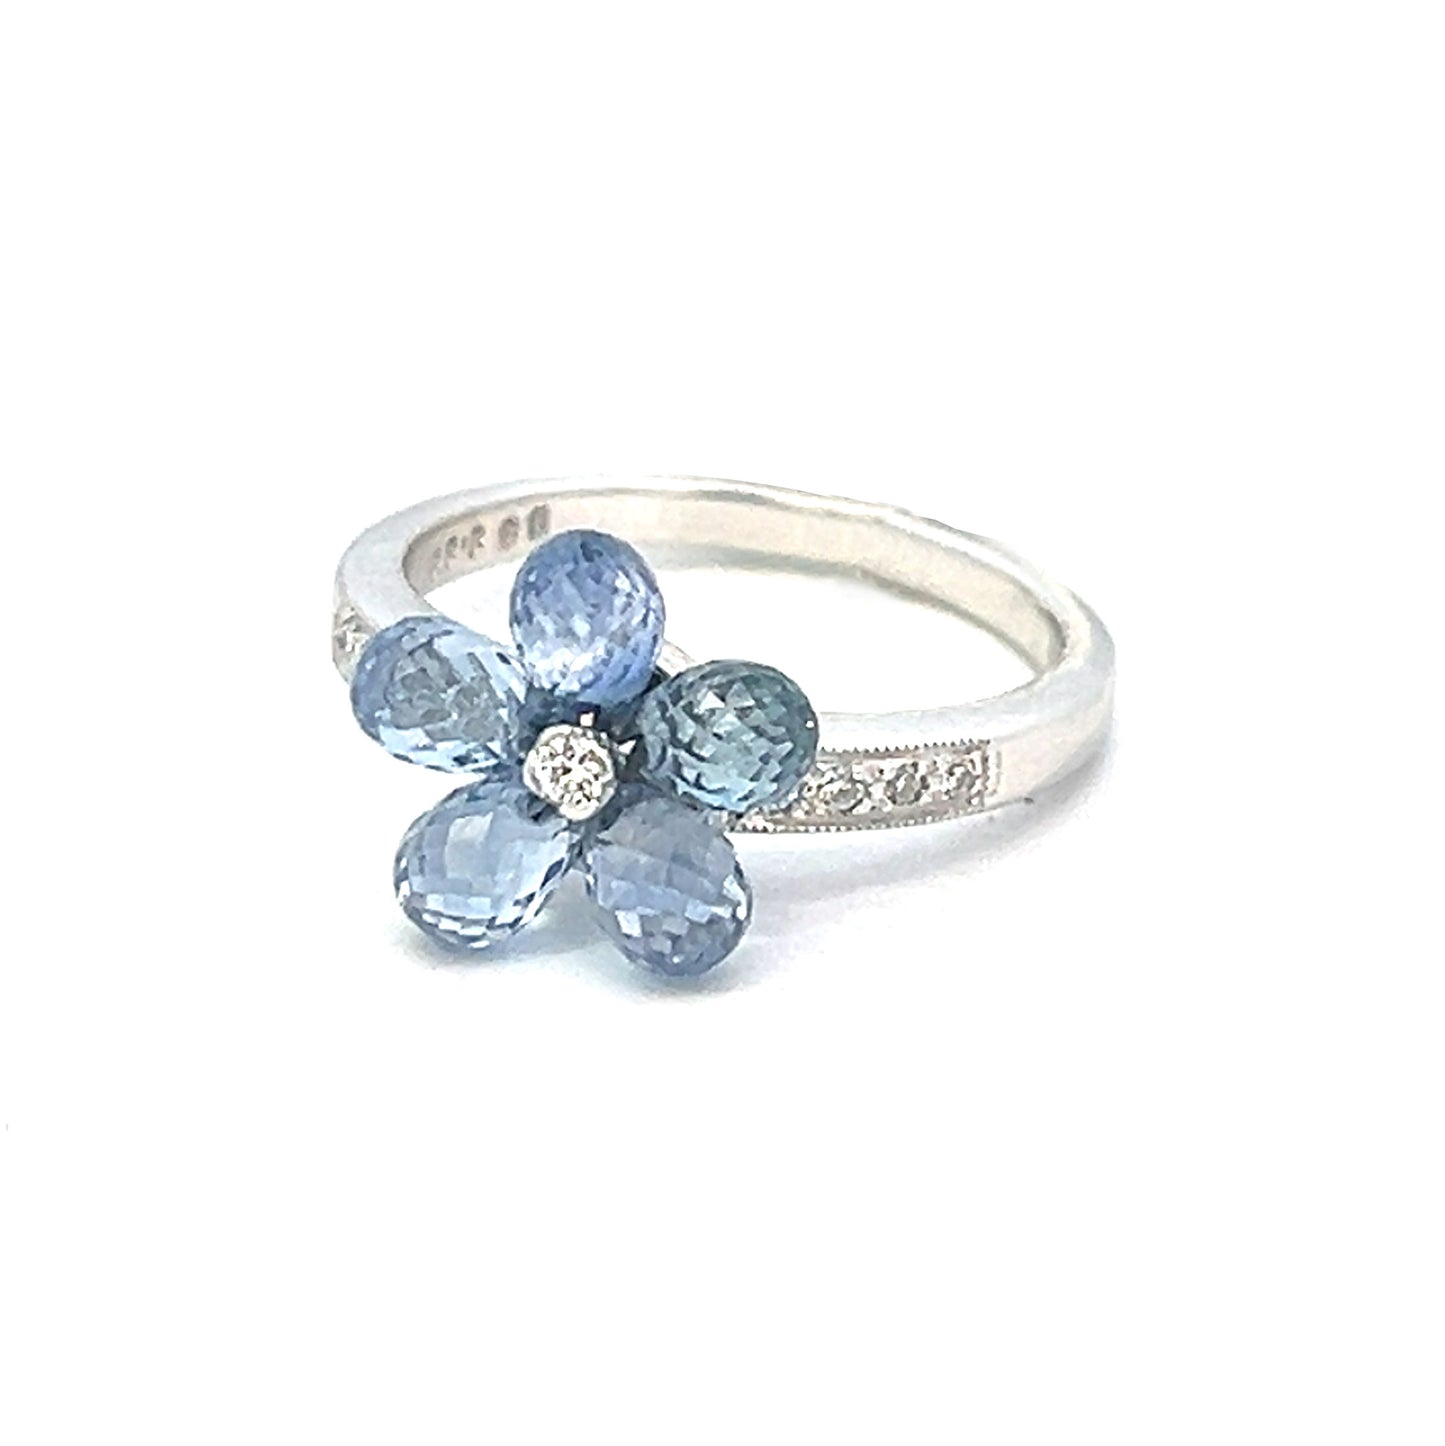 3.42cttw Sapphire and Diamond Ring | Blue Flower Ring | Sapphire and Diamond Flower Ring